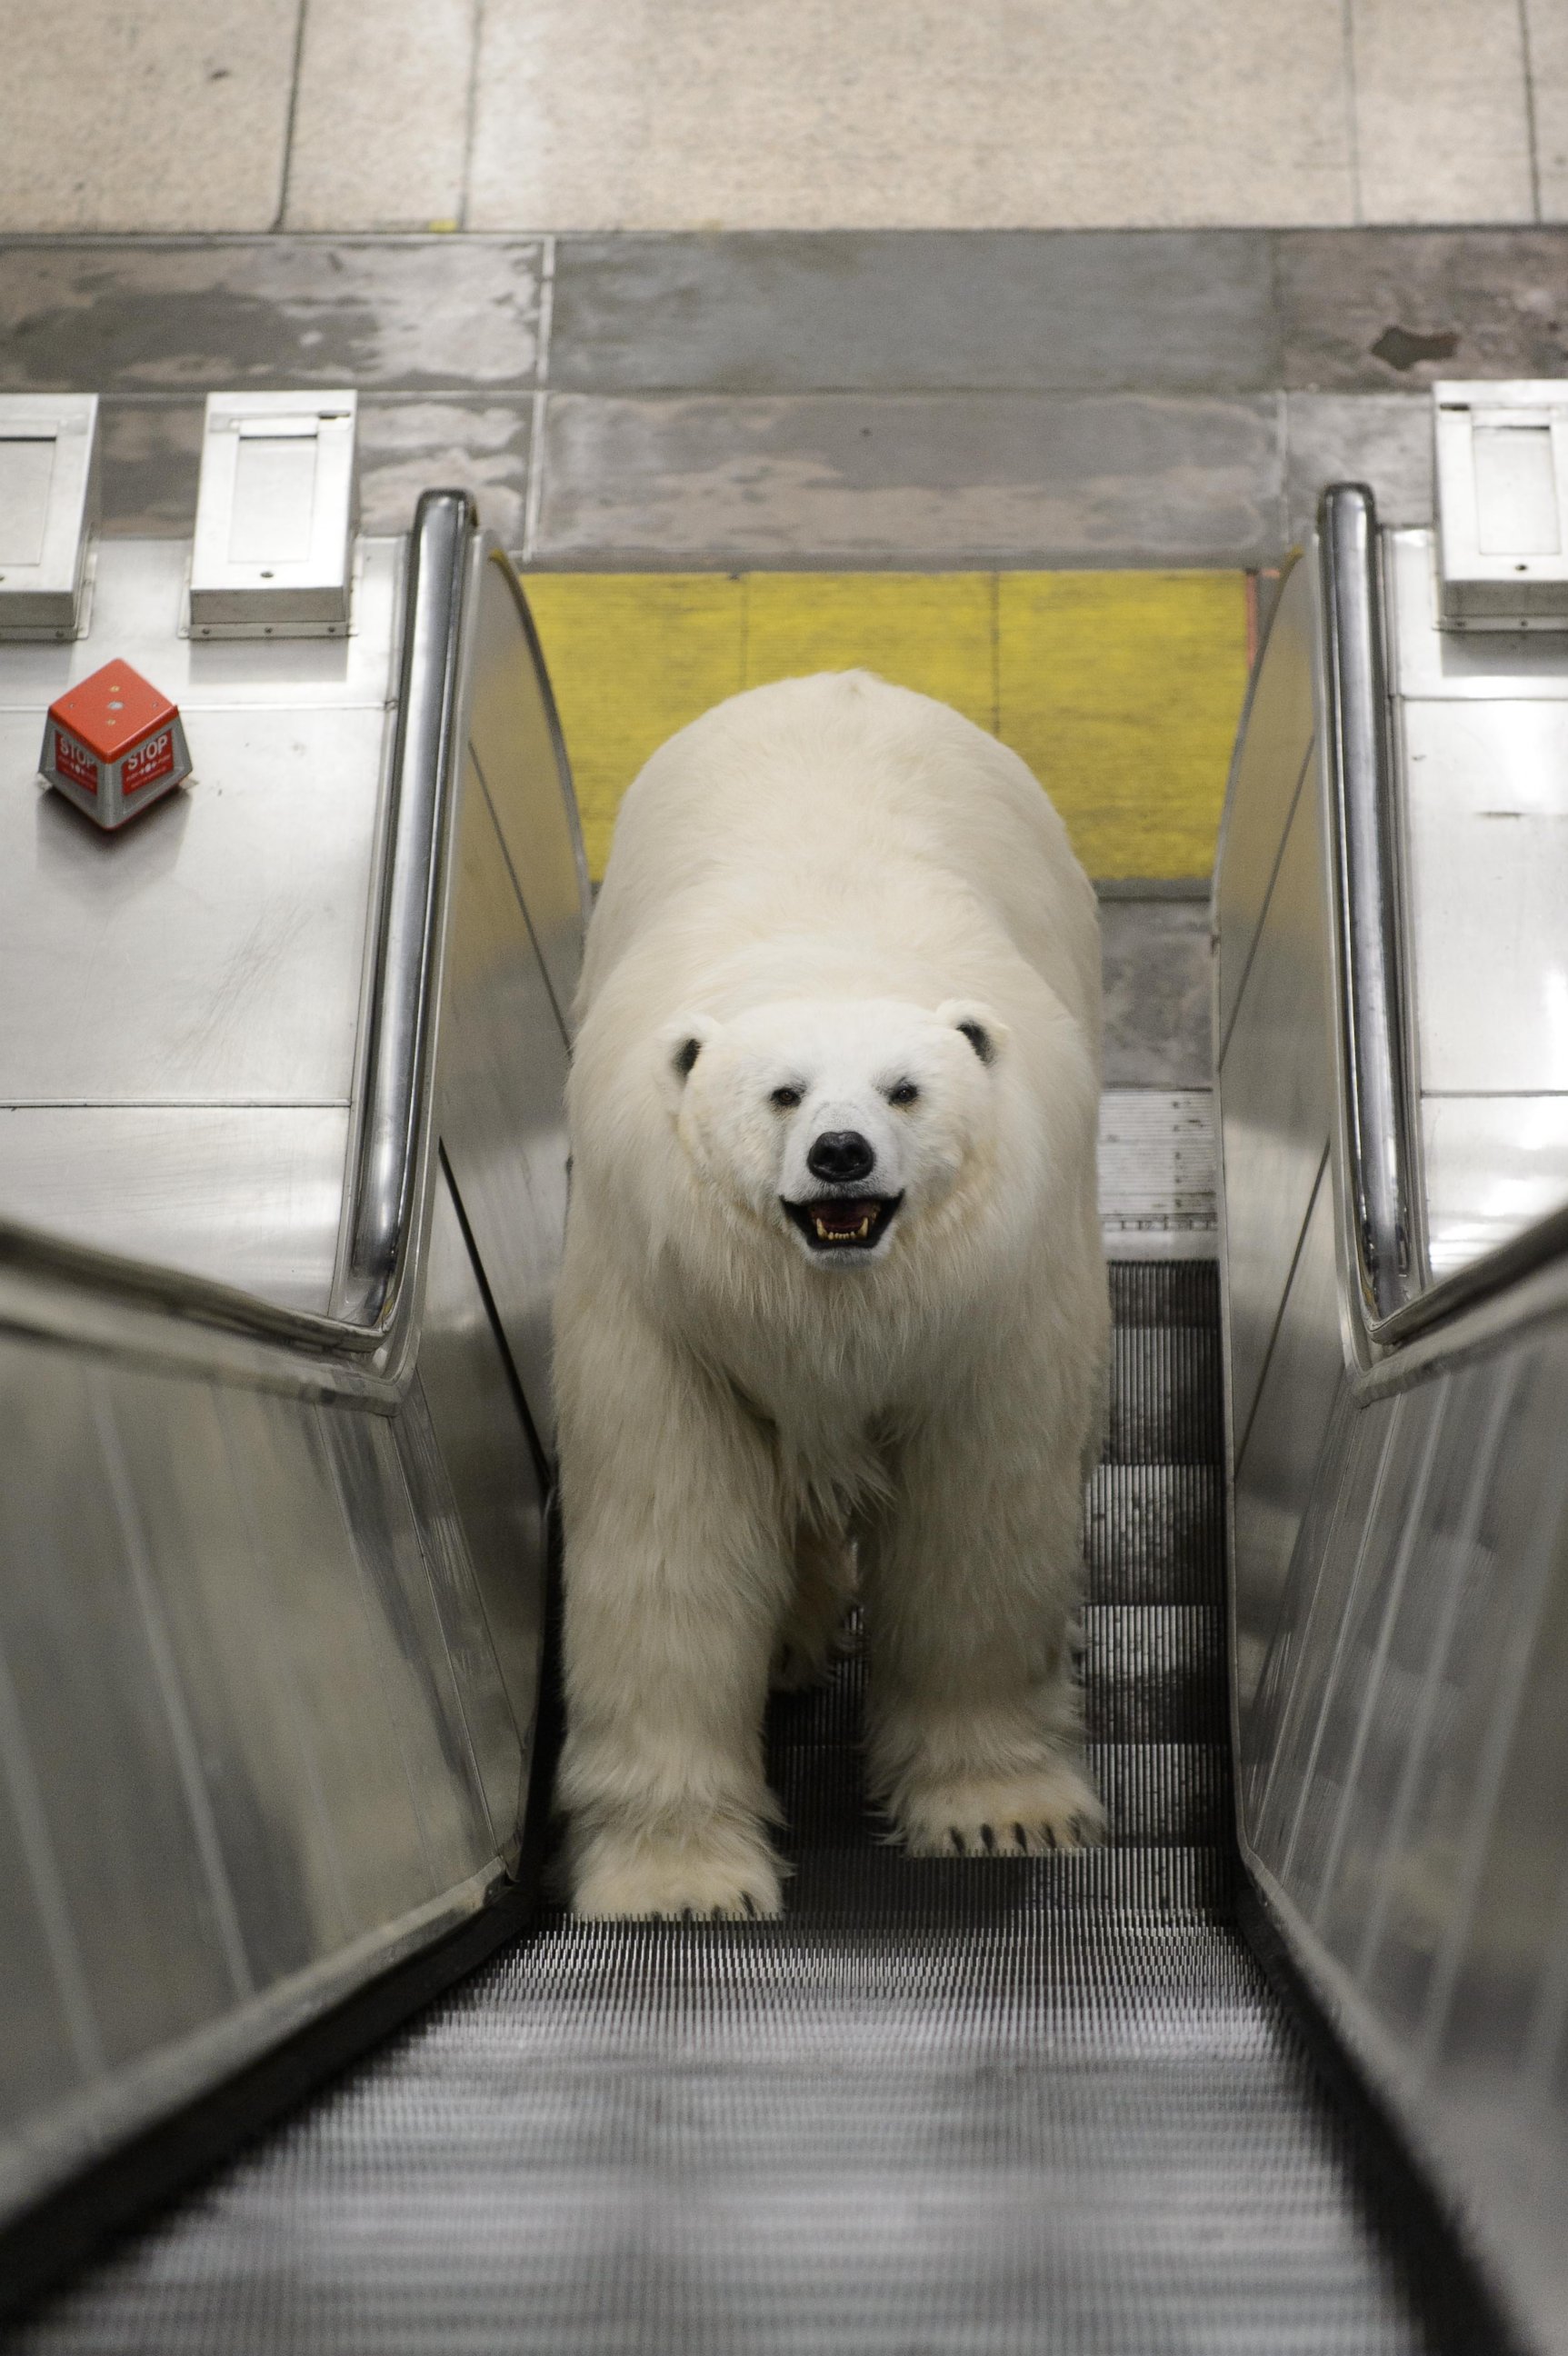 PHOTO: An 8 ft long, fully animated ?adult male polar bear? was unleashed on the freezing streets of London to mark the launch of Sky Atlantic?s hotly anticipated arctic crime drama ?Fortitude, Jan. 27, 2015?.